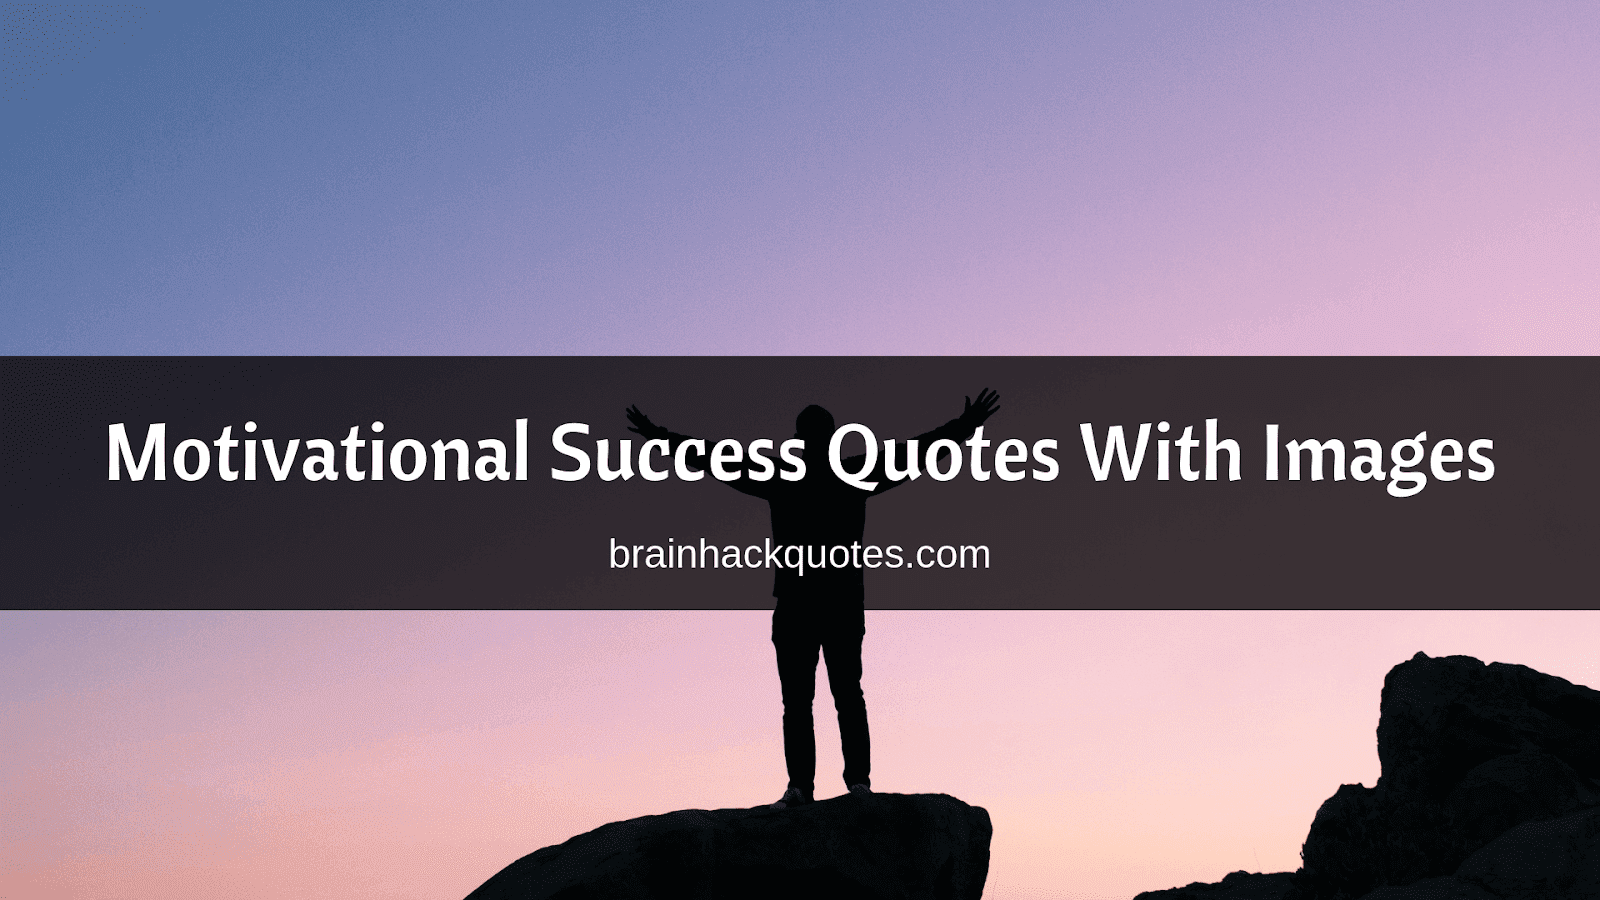 Motivational Success Quotes With Images - Silhouette - HD Wallpaper 